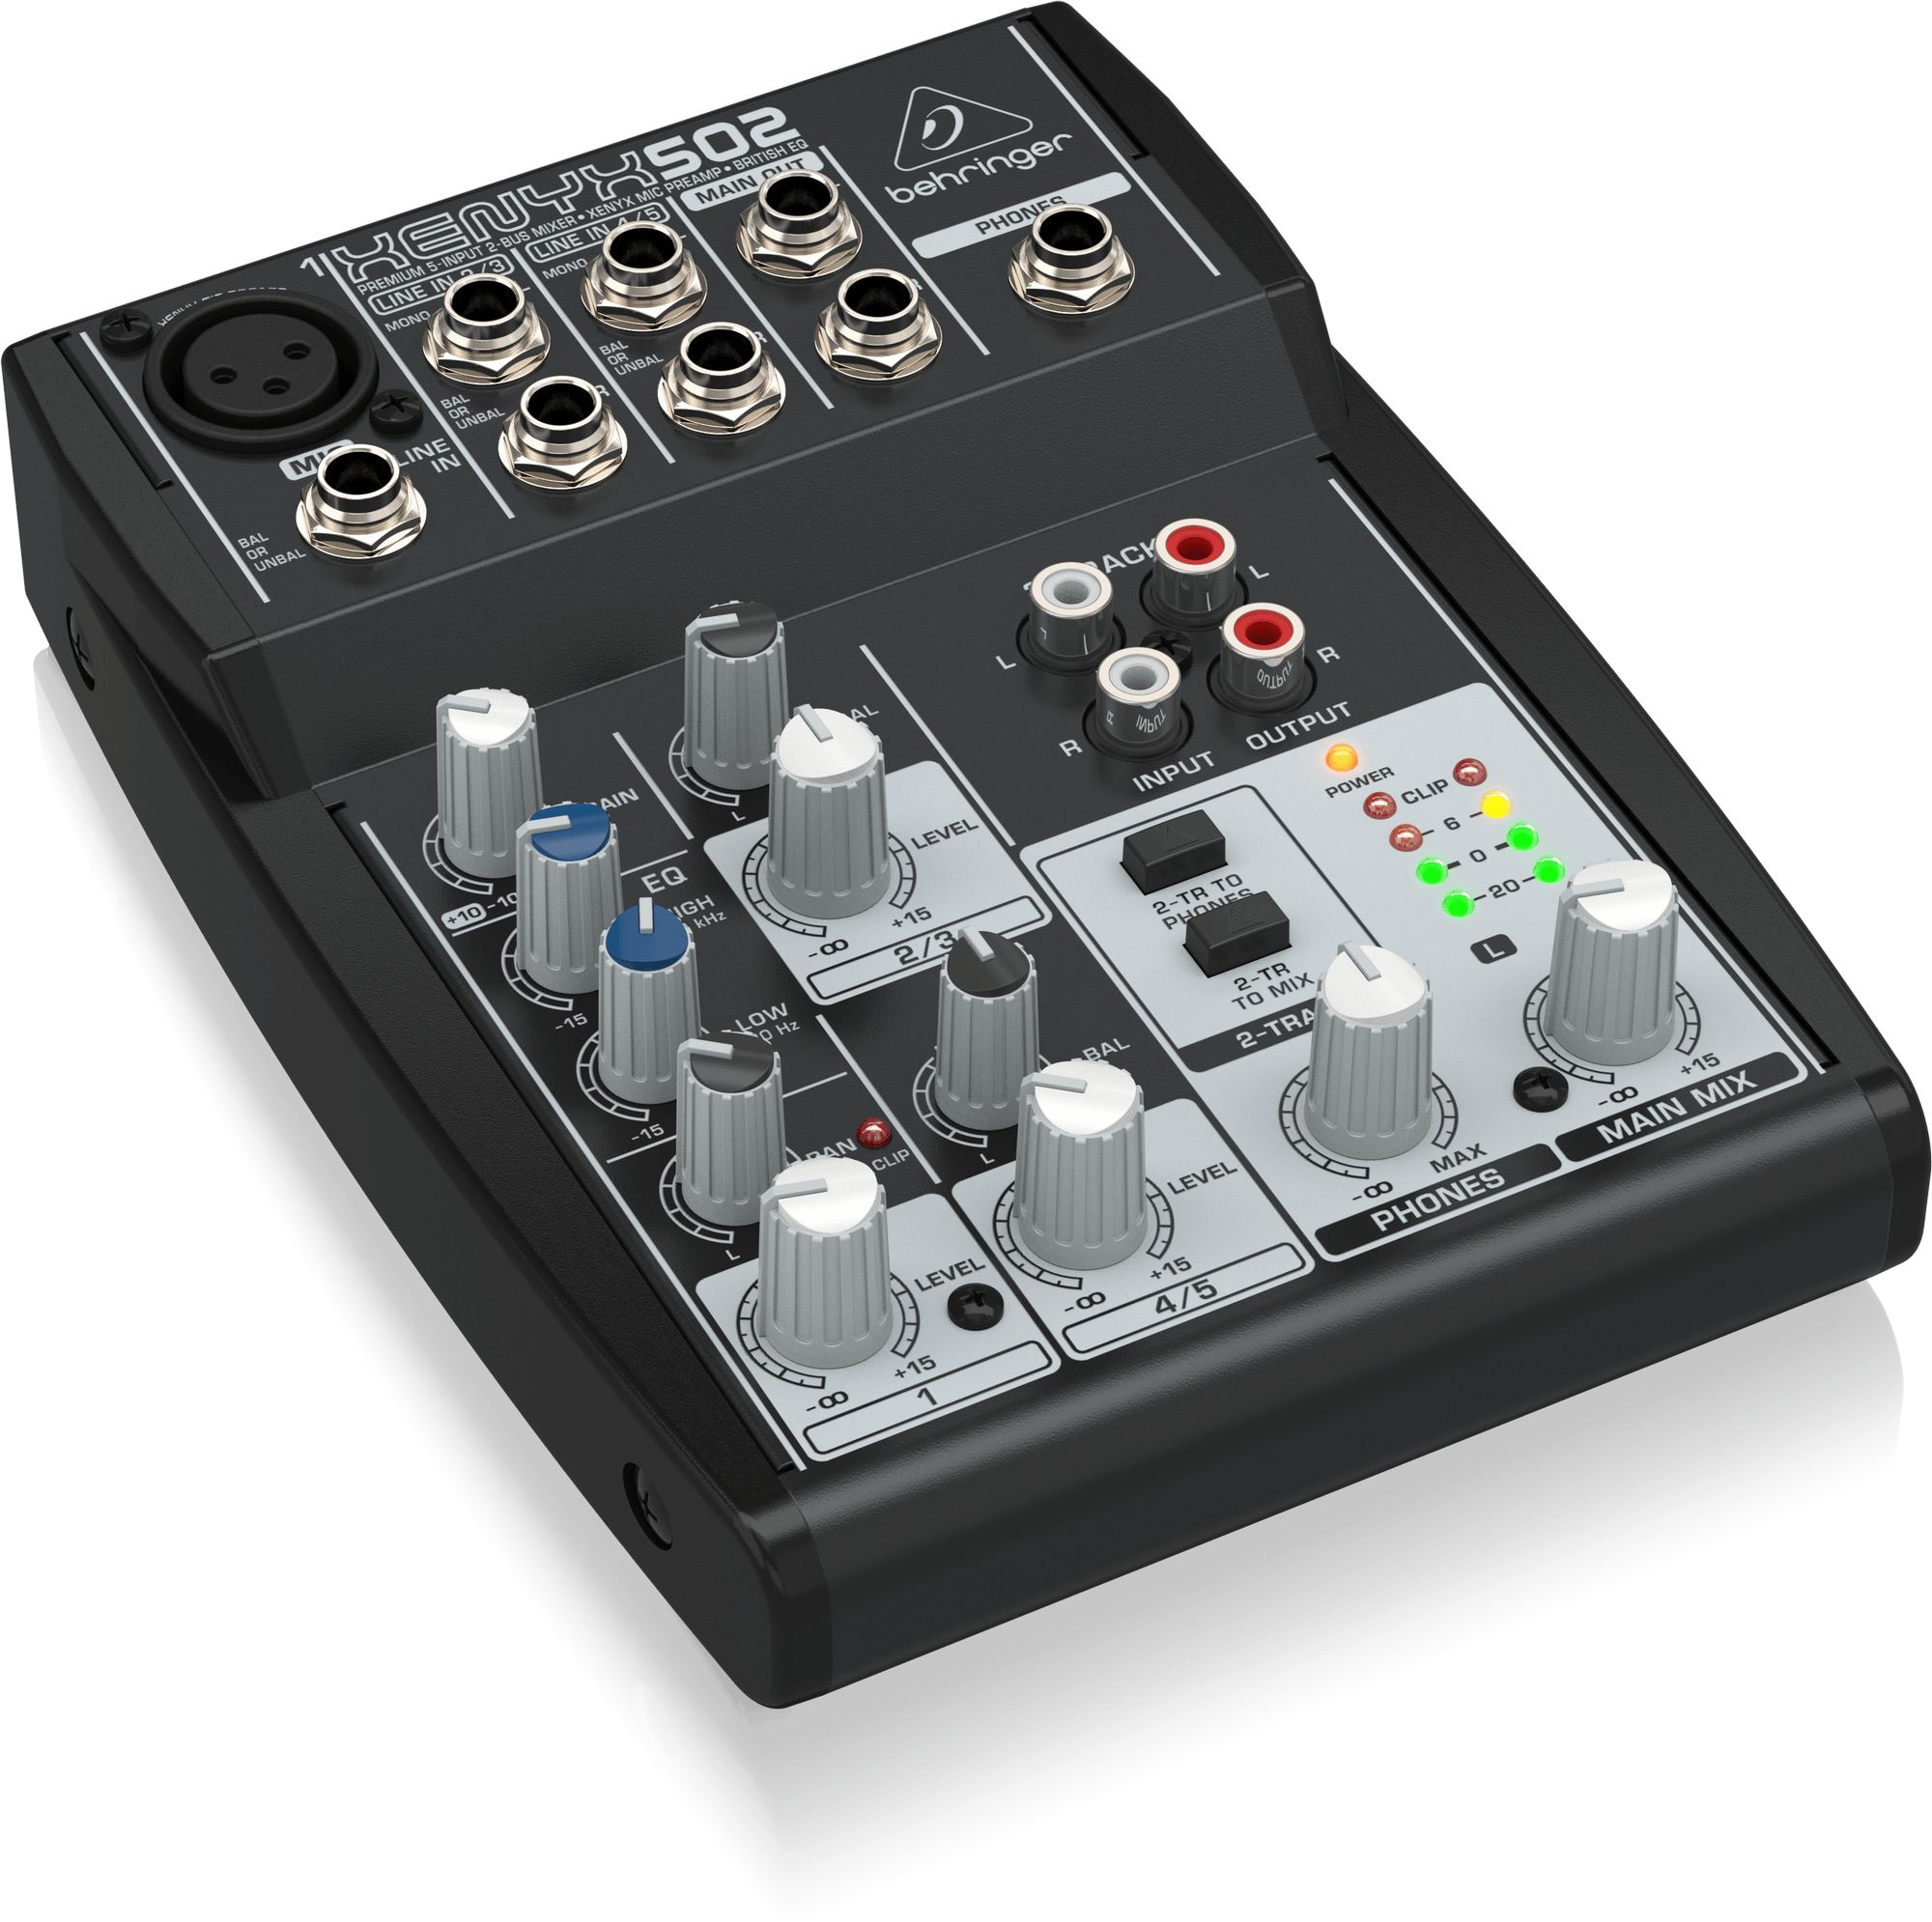 Behringer XENYX 502 5-Channel Audio Mixer and Accessory Bundle w/ 5X Cables and Fibertique Cloth 